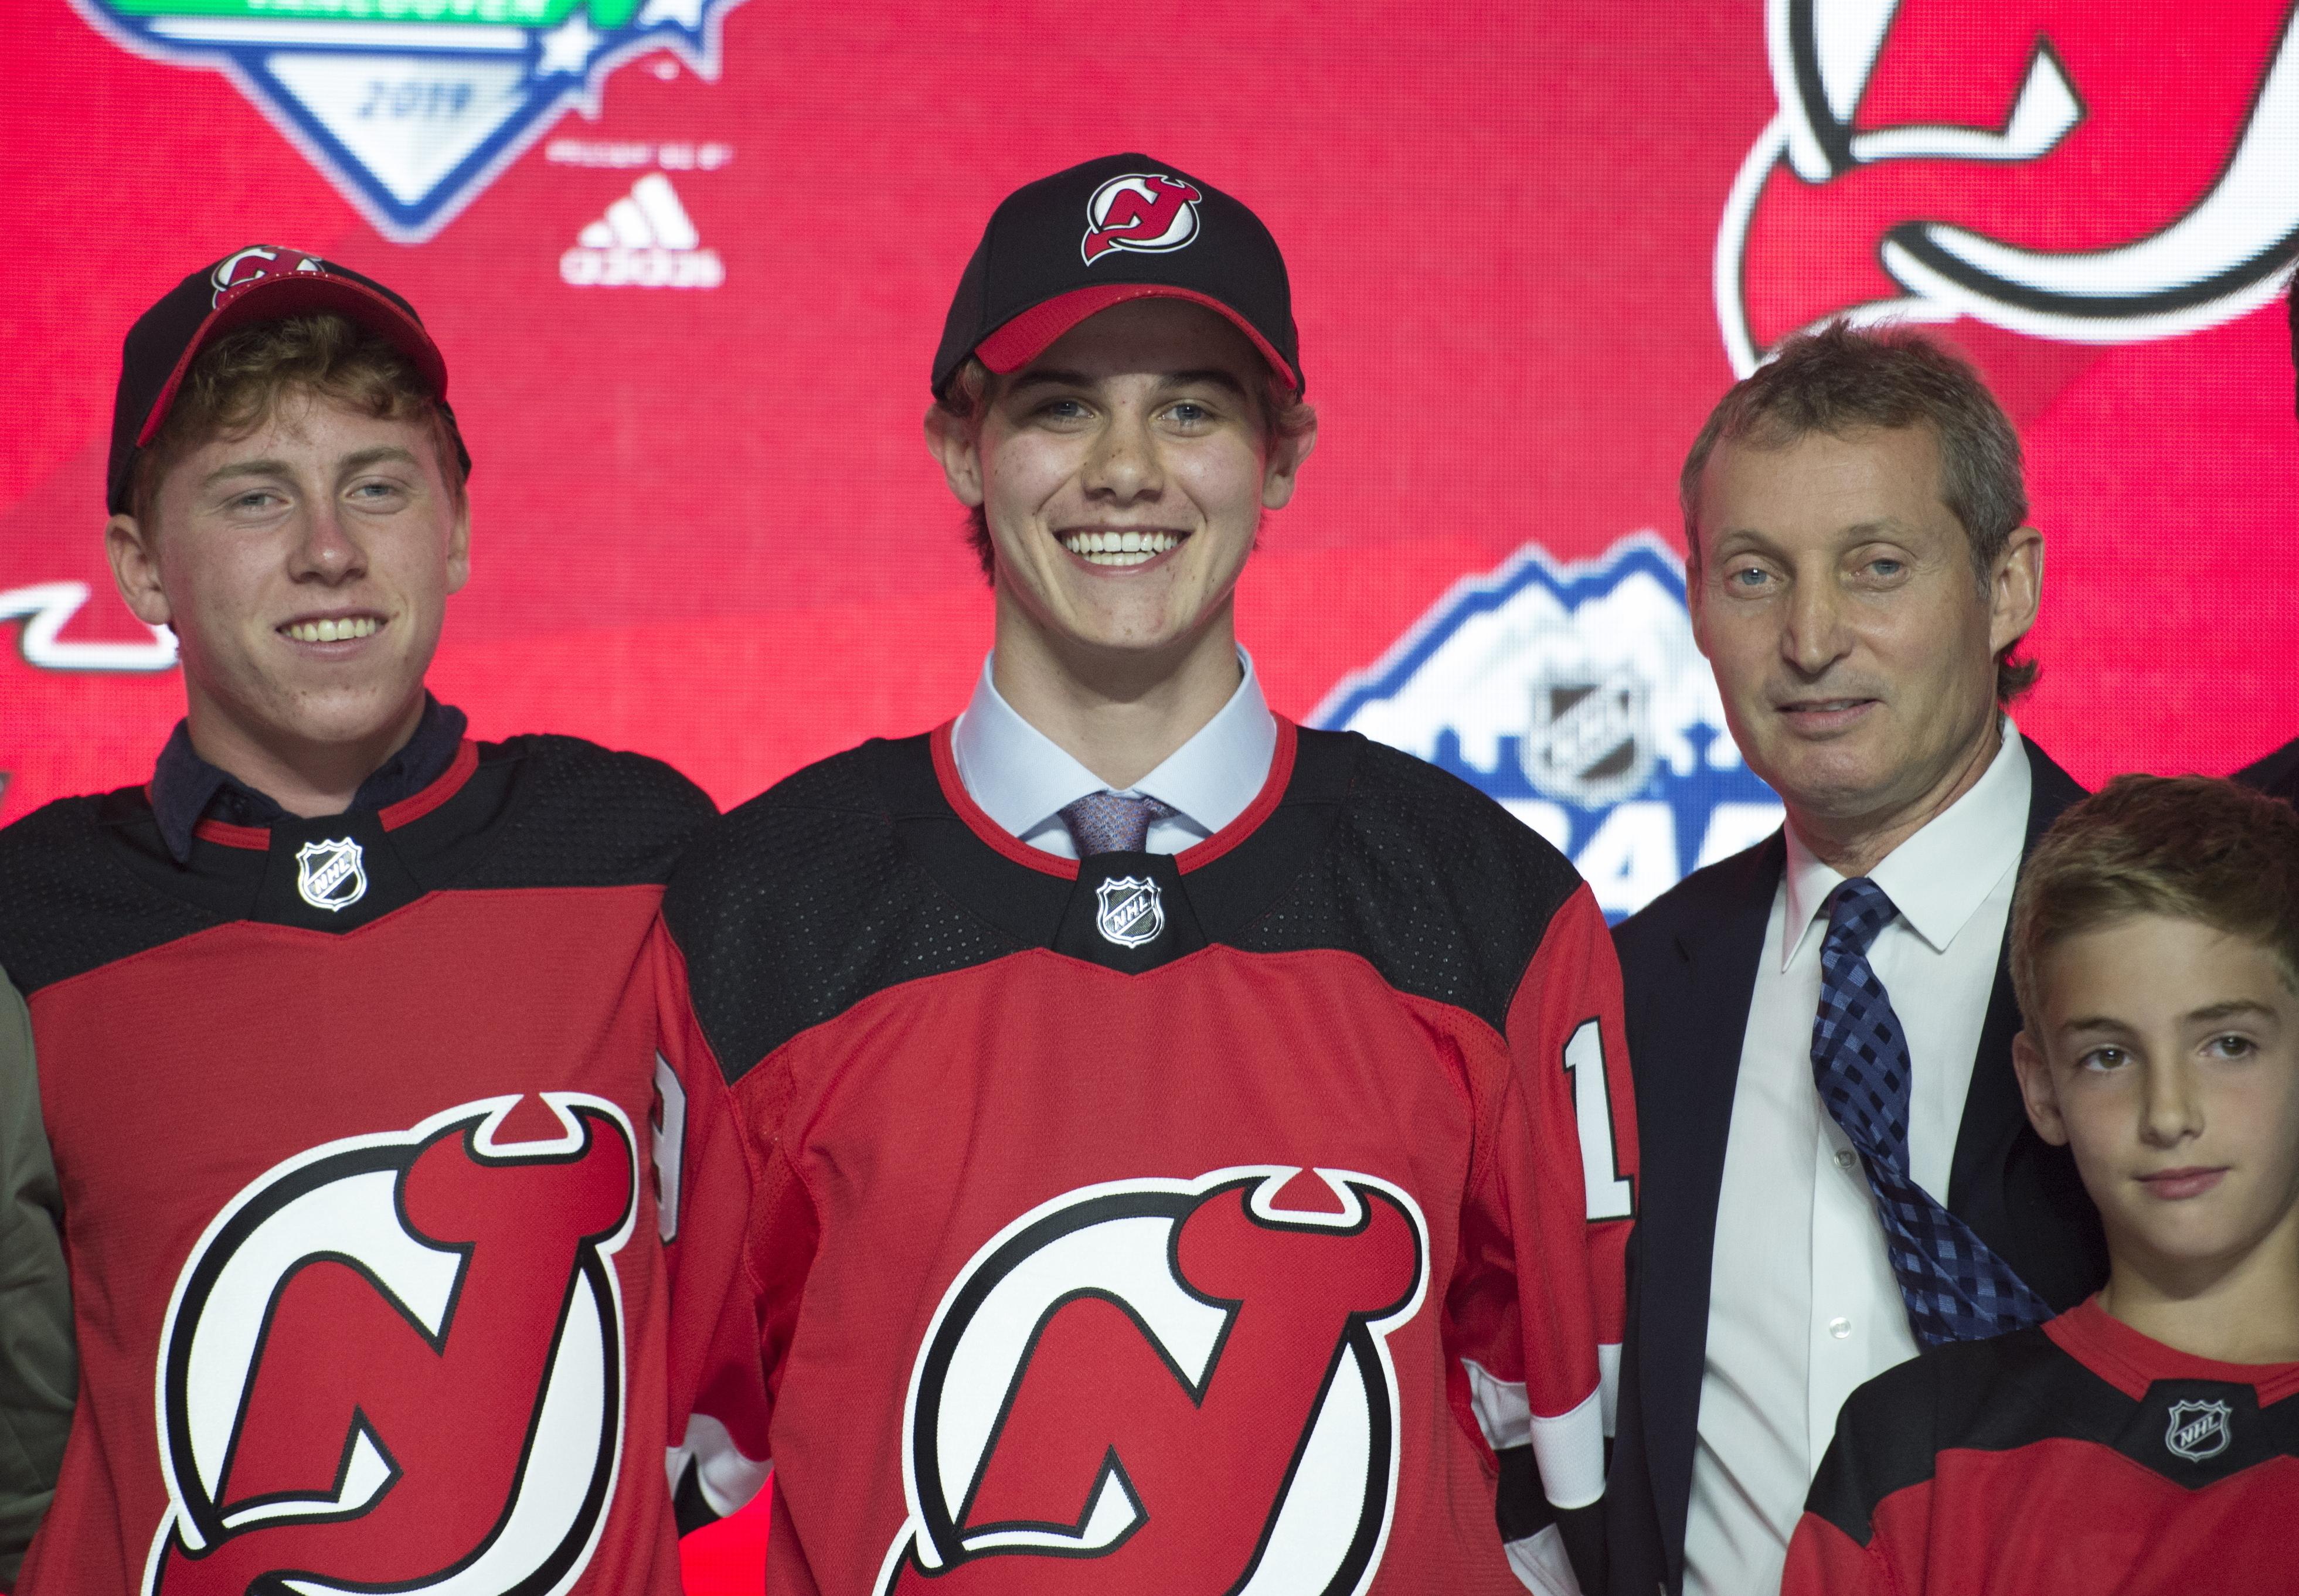 New Jersey Devils select U.S. center Jack Hughes with 1st pick in NHL